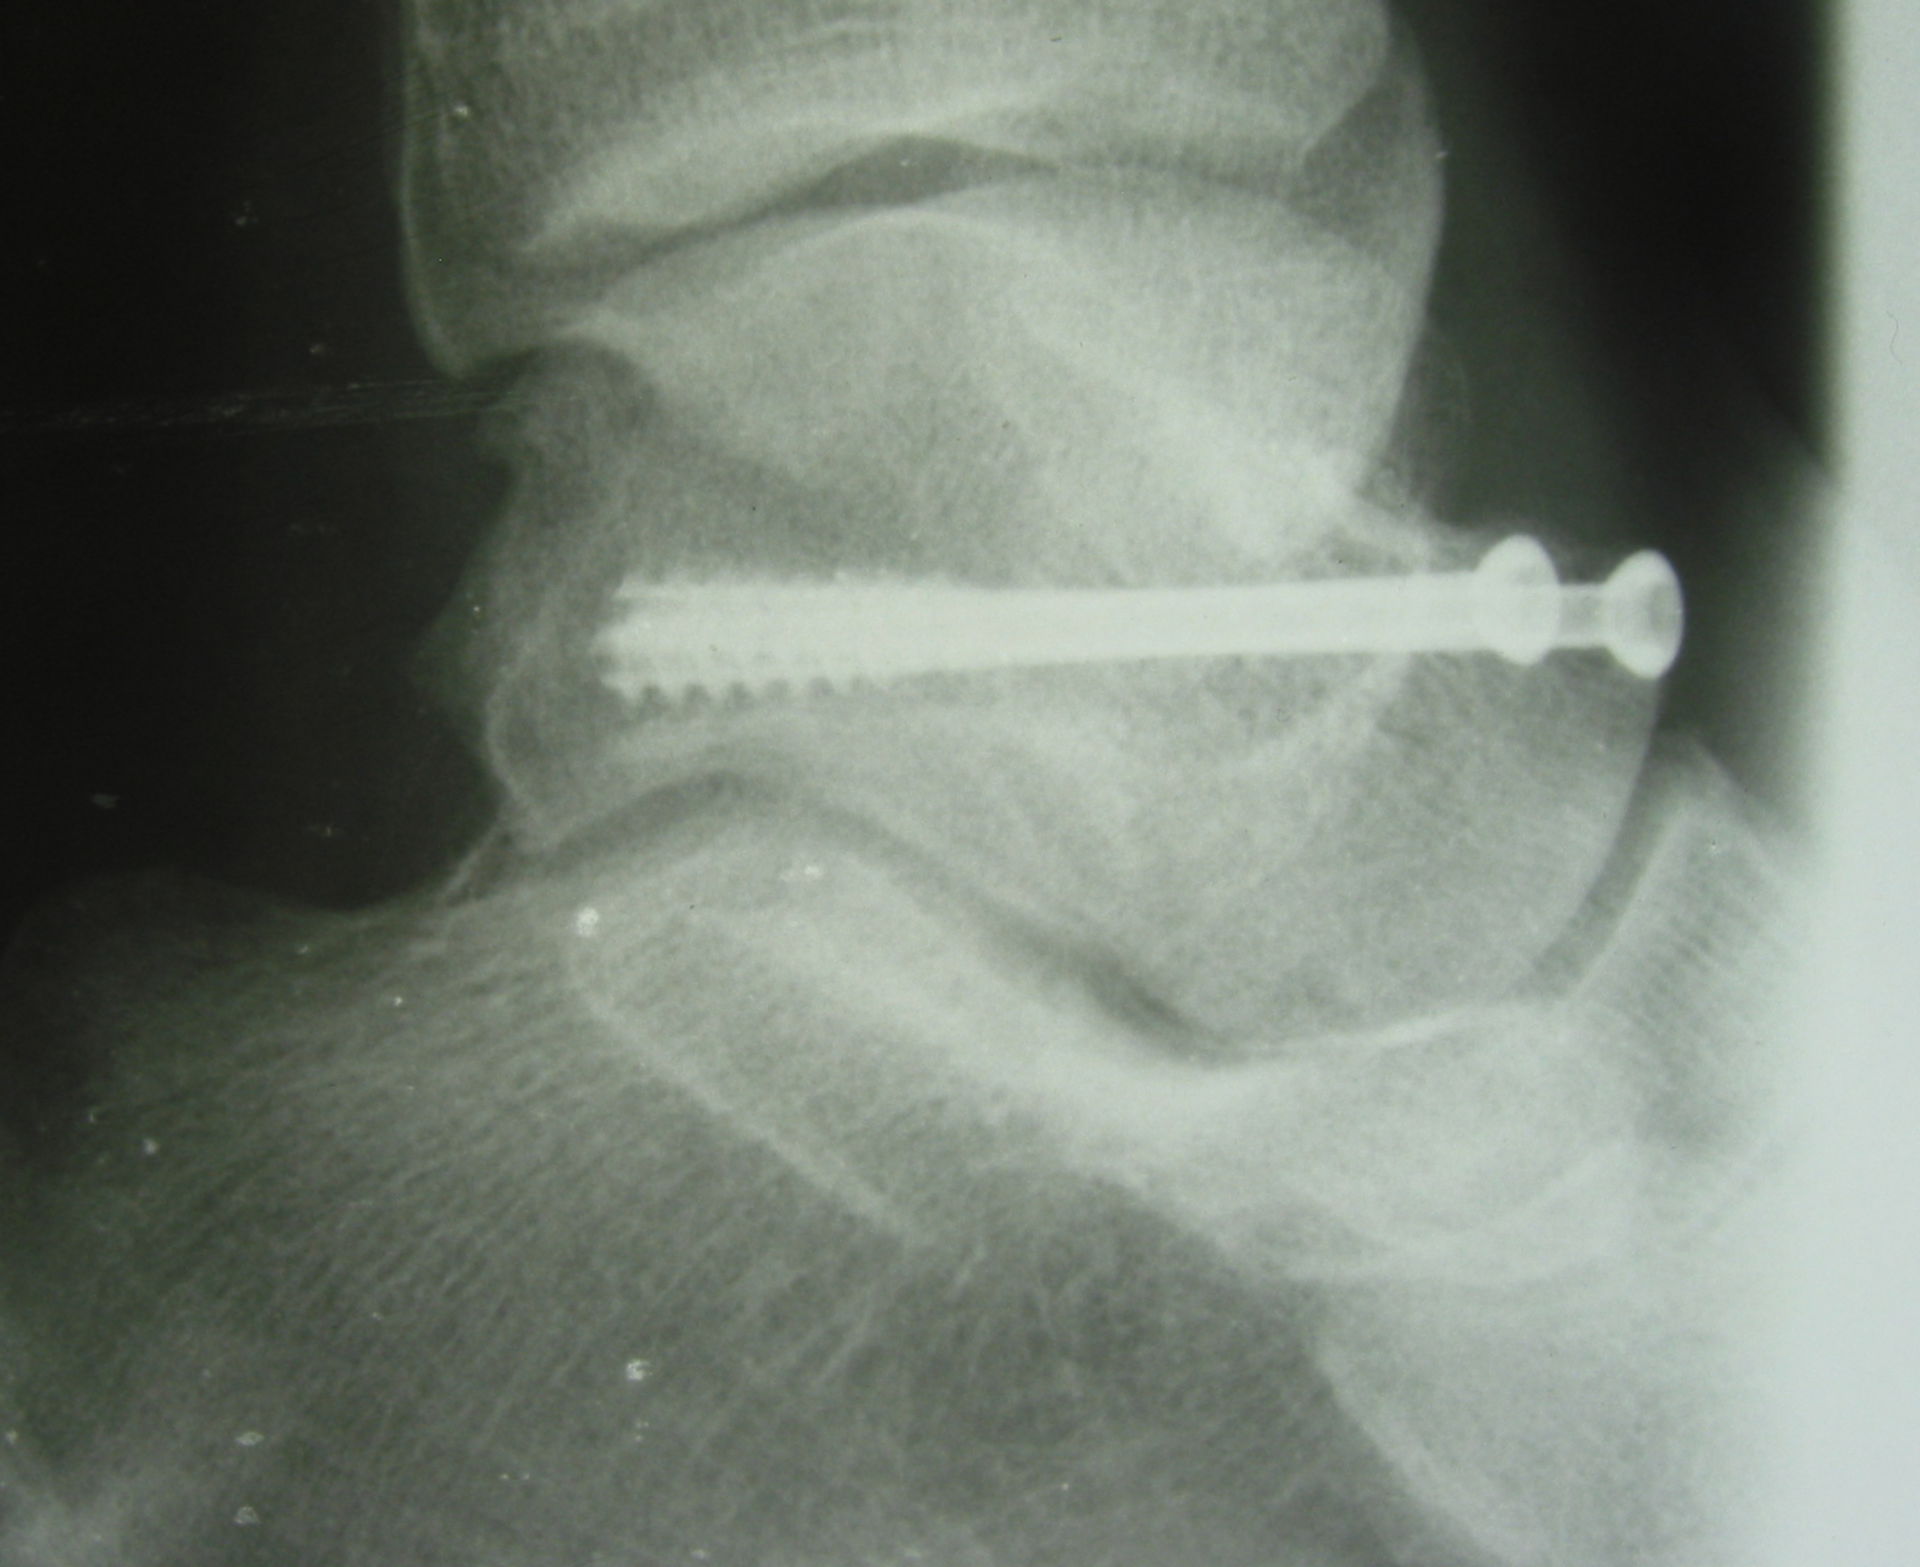 Talus fracture - screw osteosynthesis